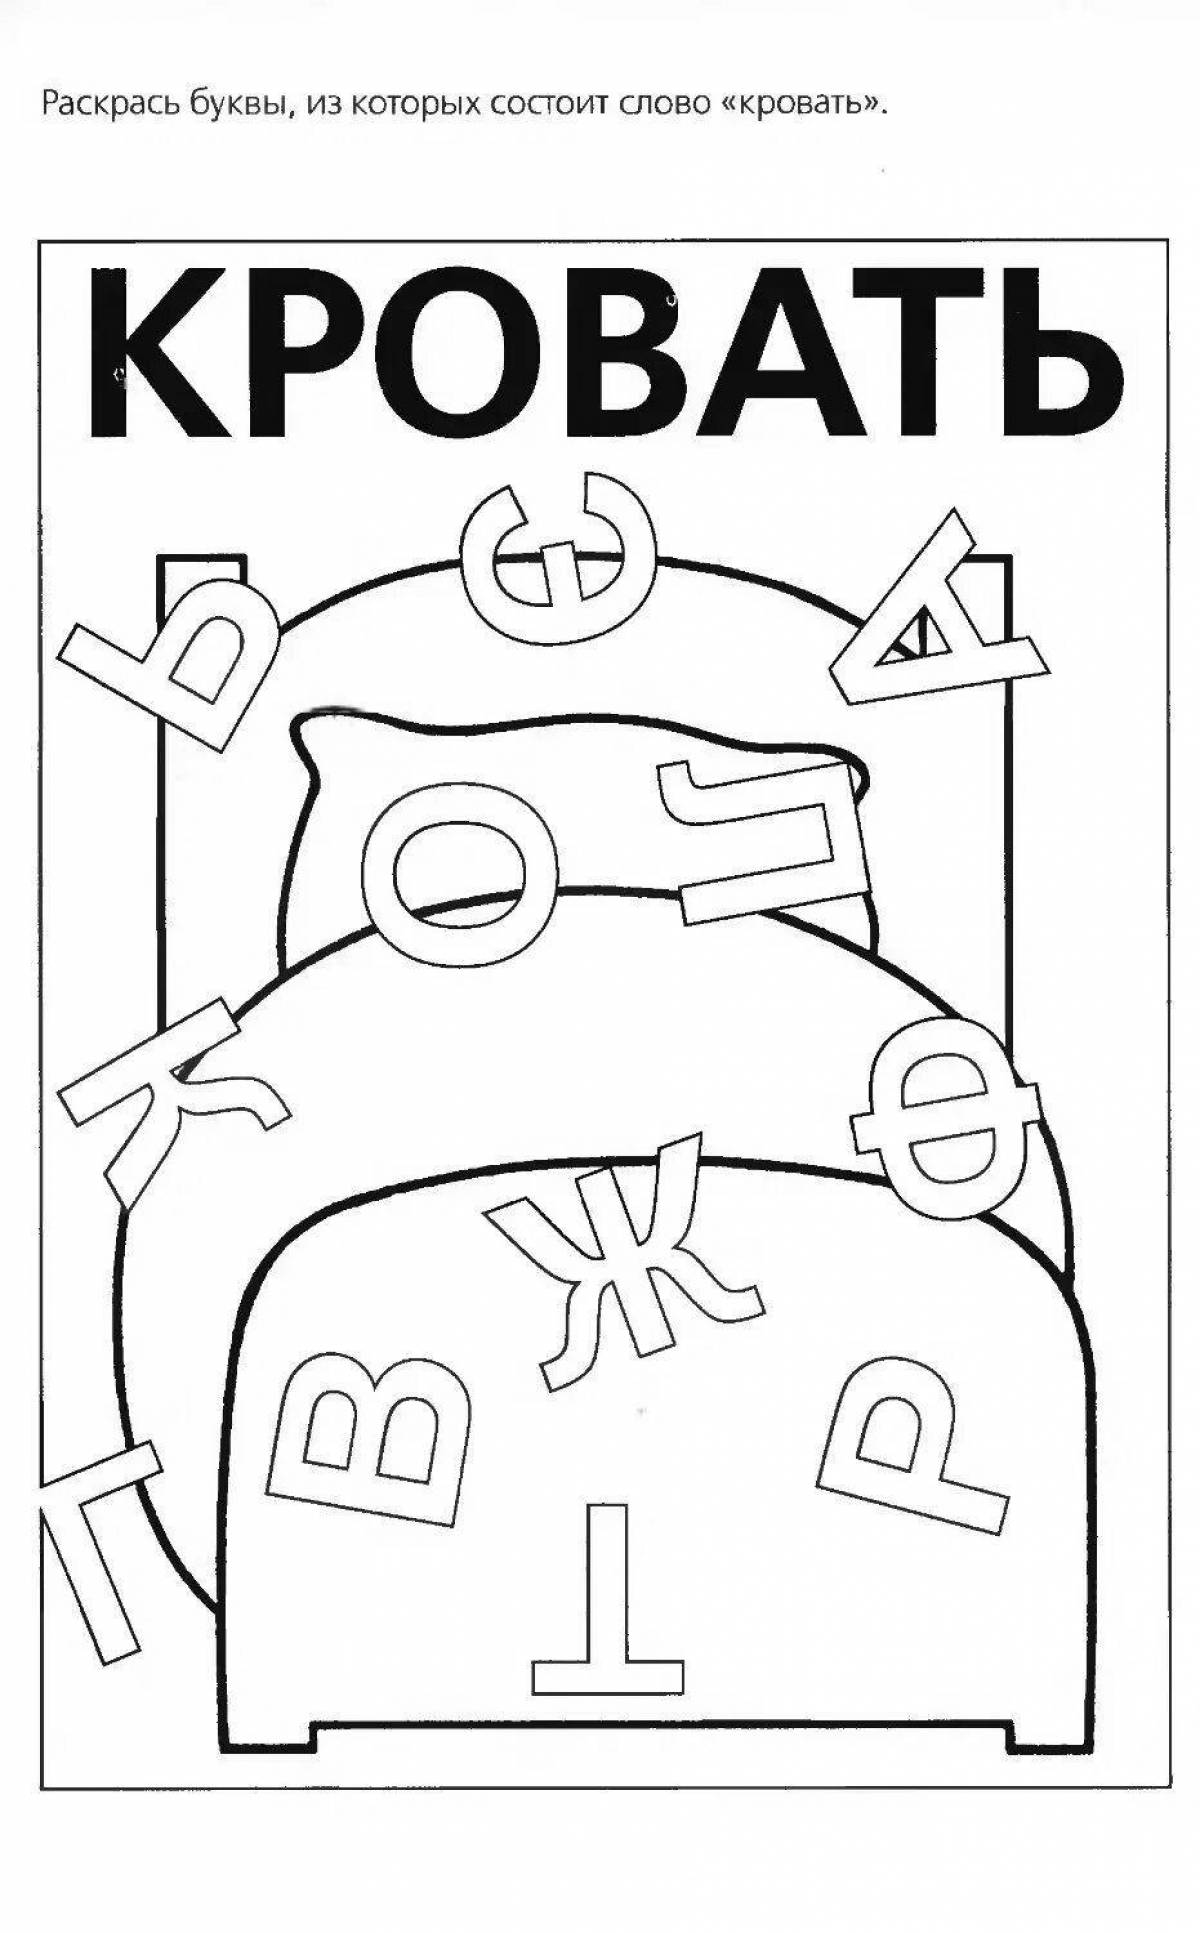 Intriguing text coloring page